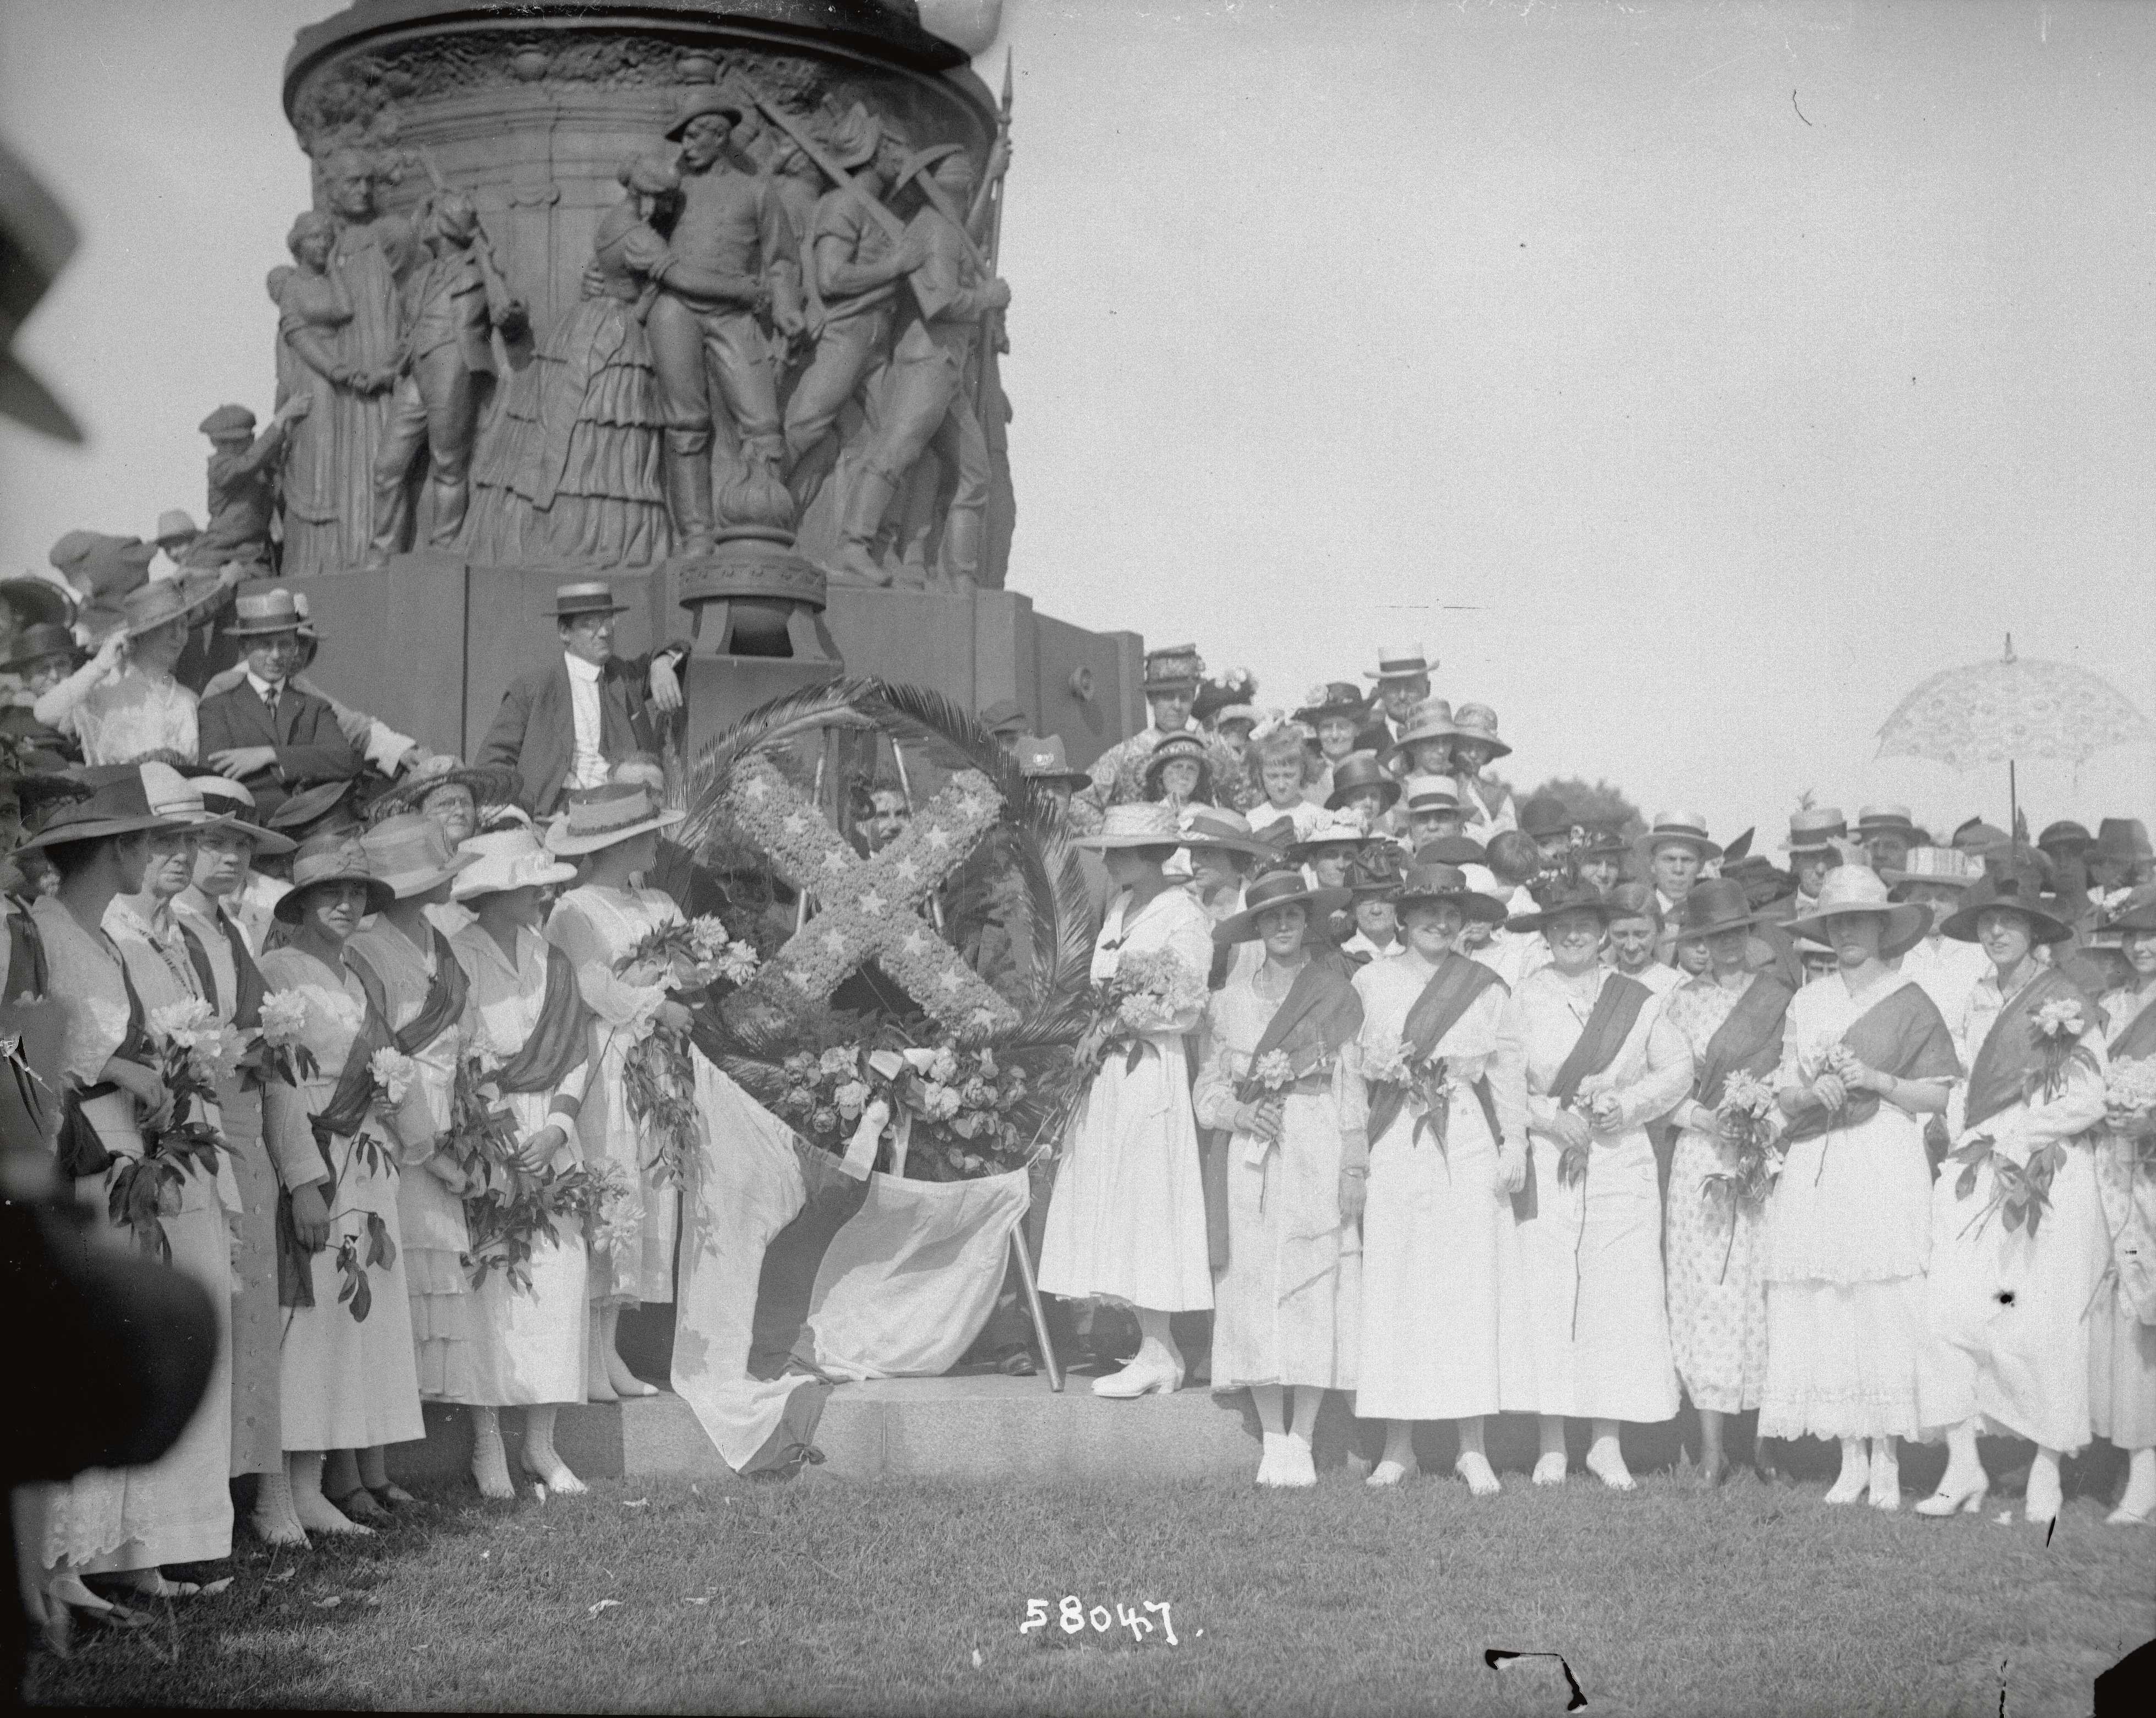 A photo of a large group of The United Daughters of the Confederacy posing together stand together in front of a monument.